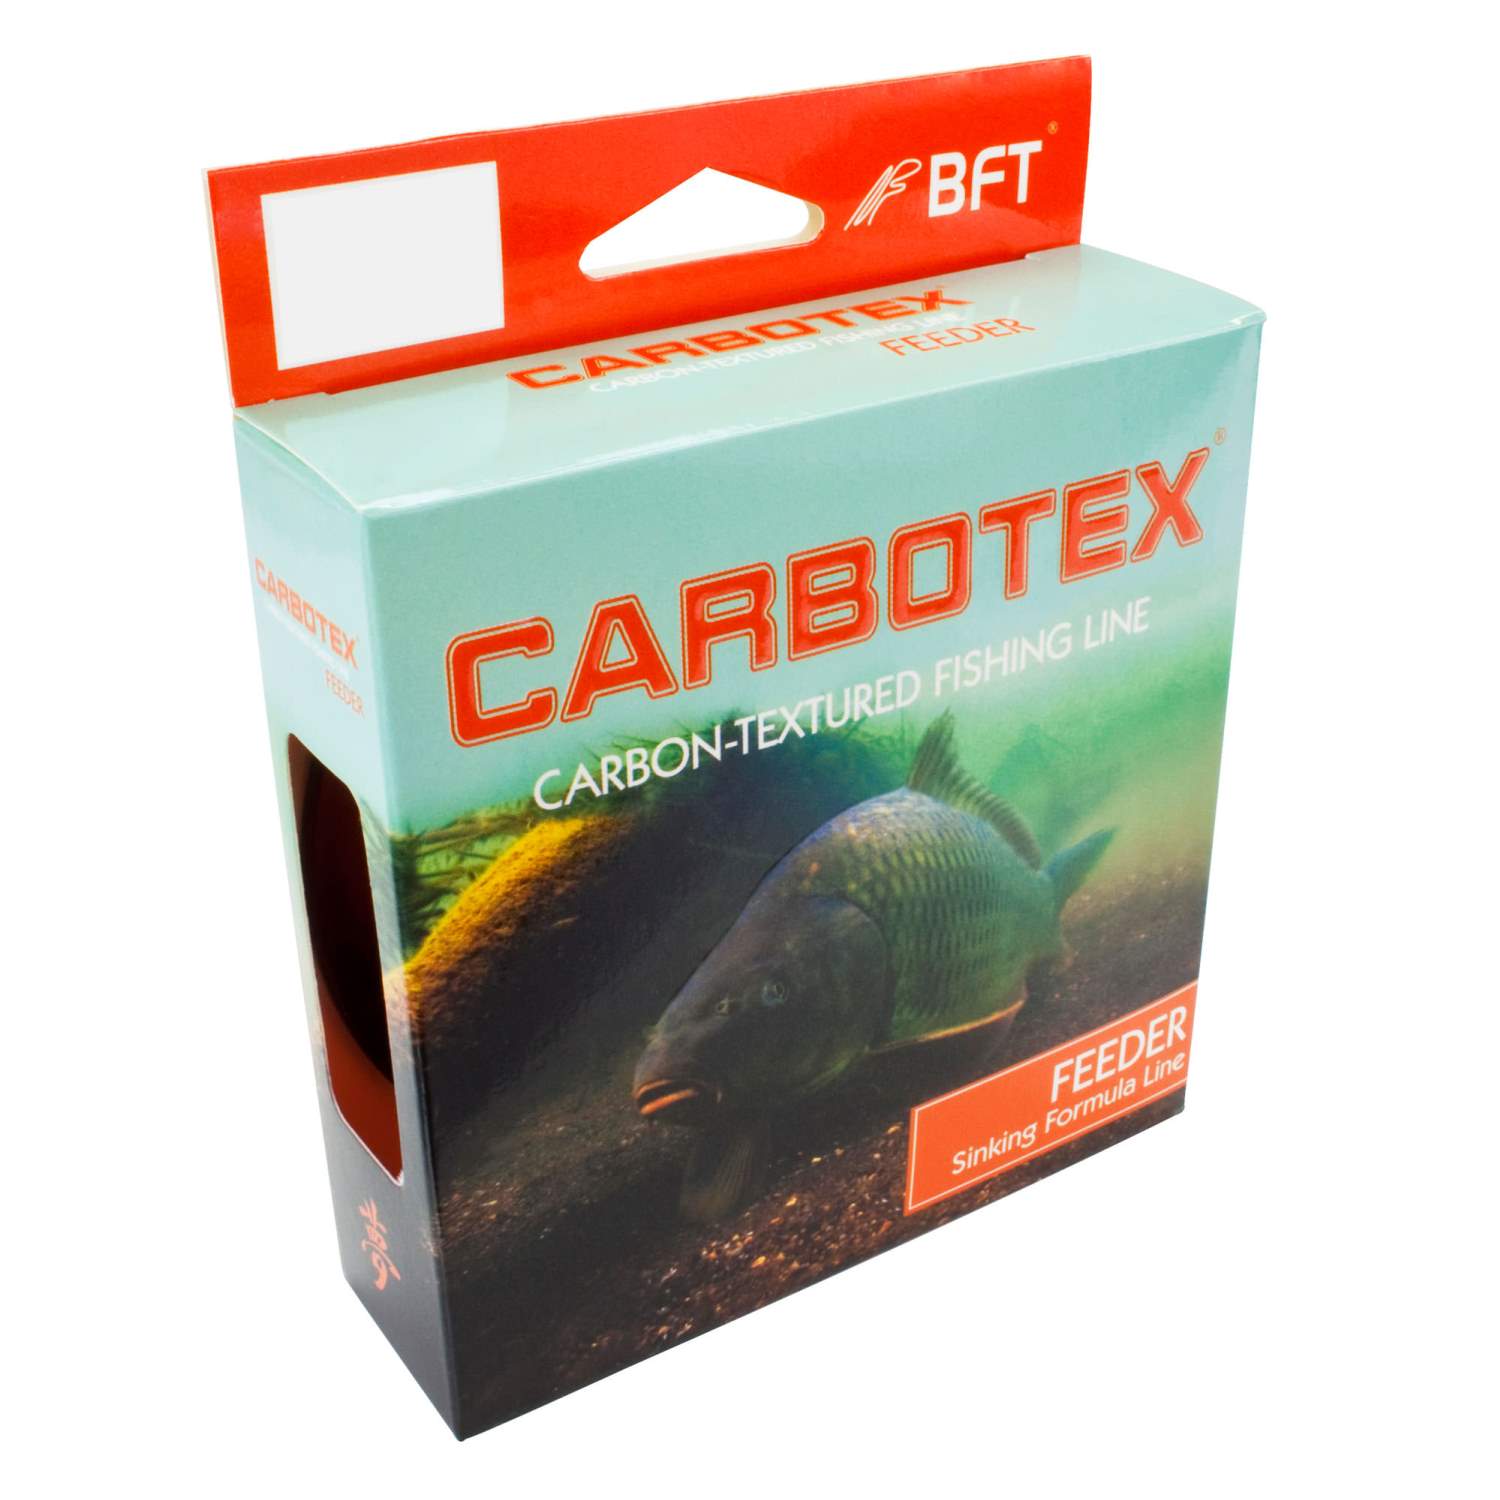 Feeder fishing line Carbotex fluo orange monofilament 250m feed string